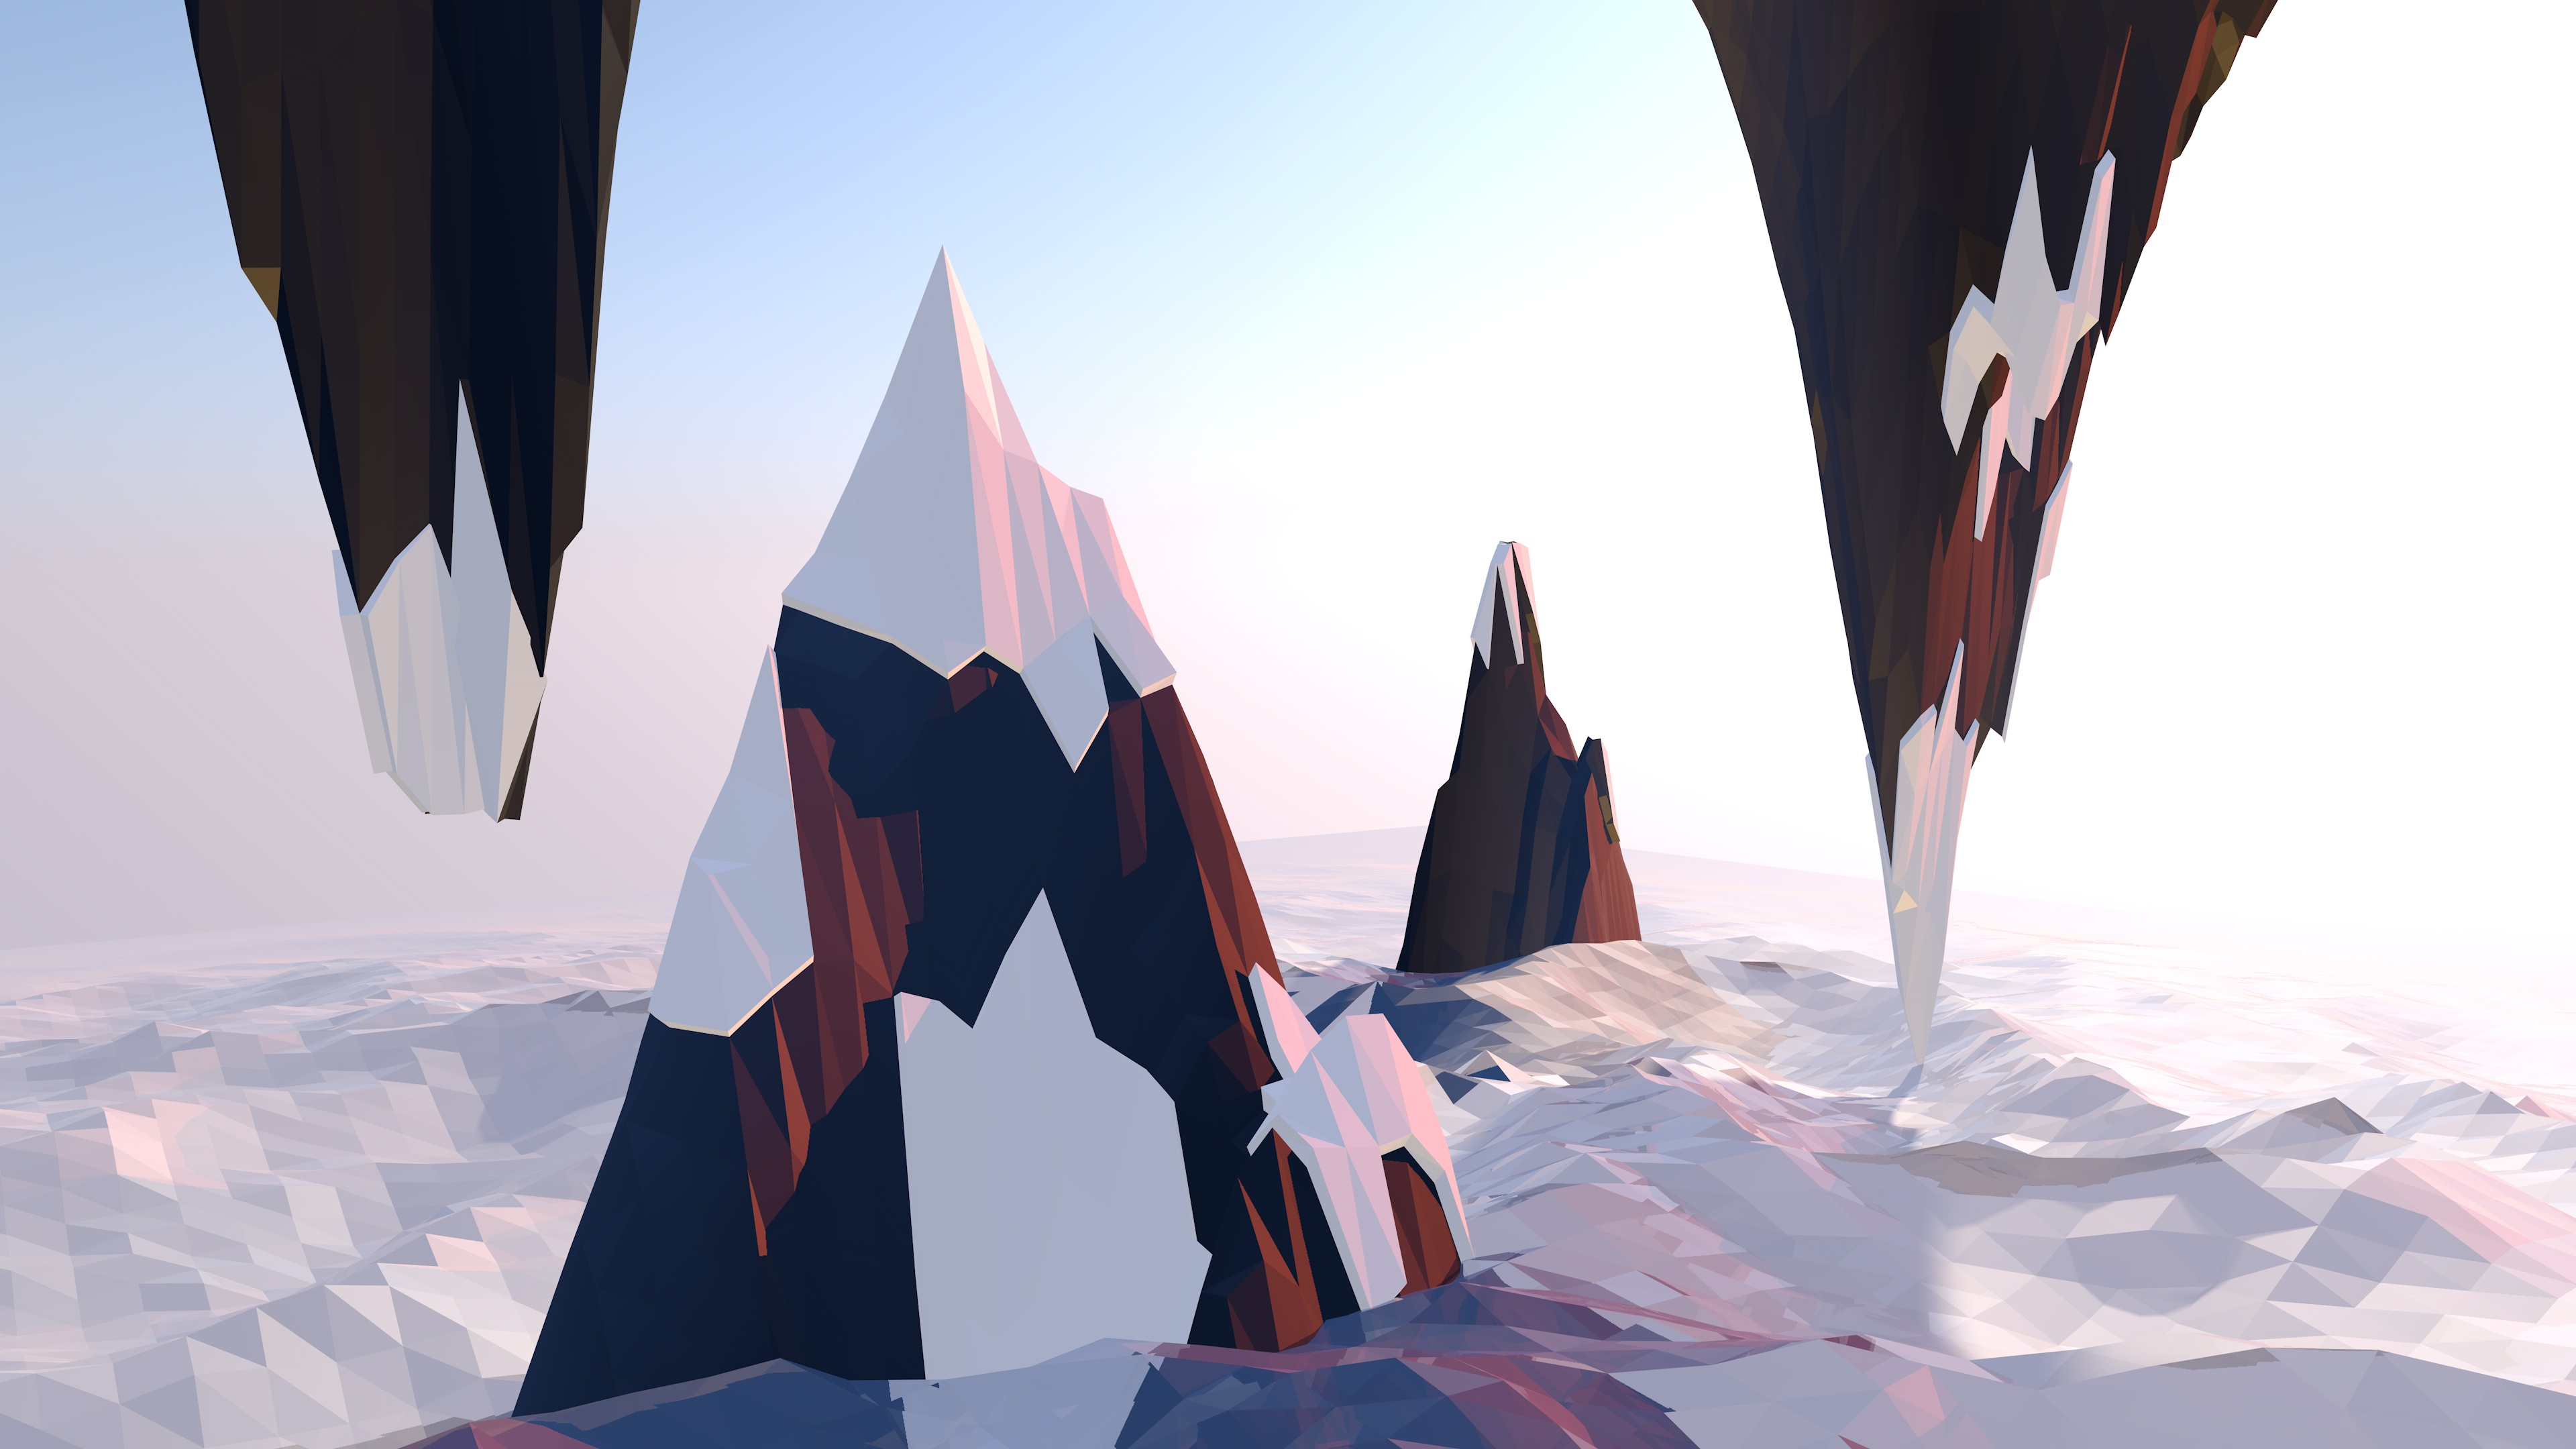 Wallpaper polygon 4k 5k wallpaper landscape nature low poly 3D  Abstract 12614